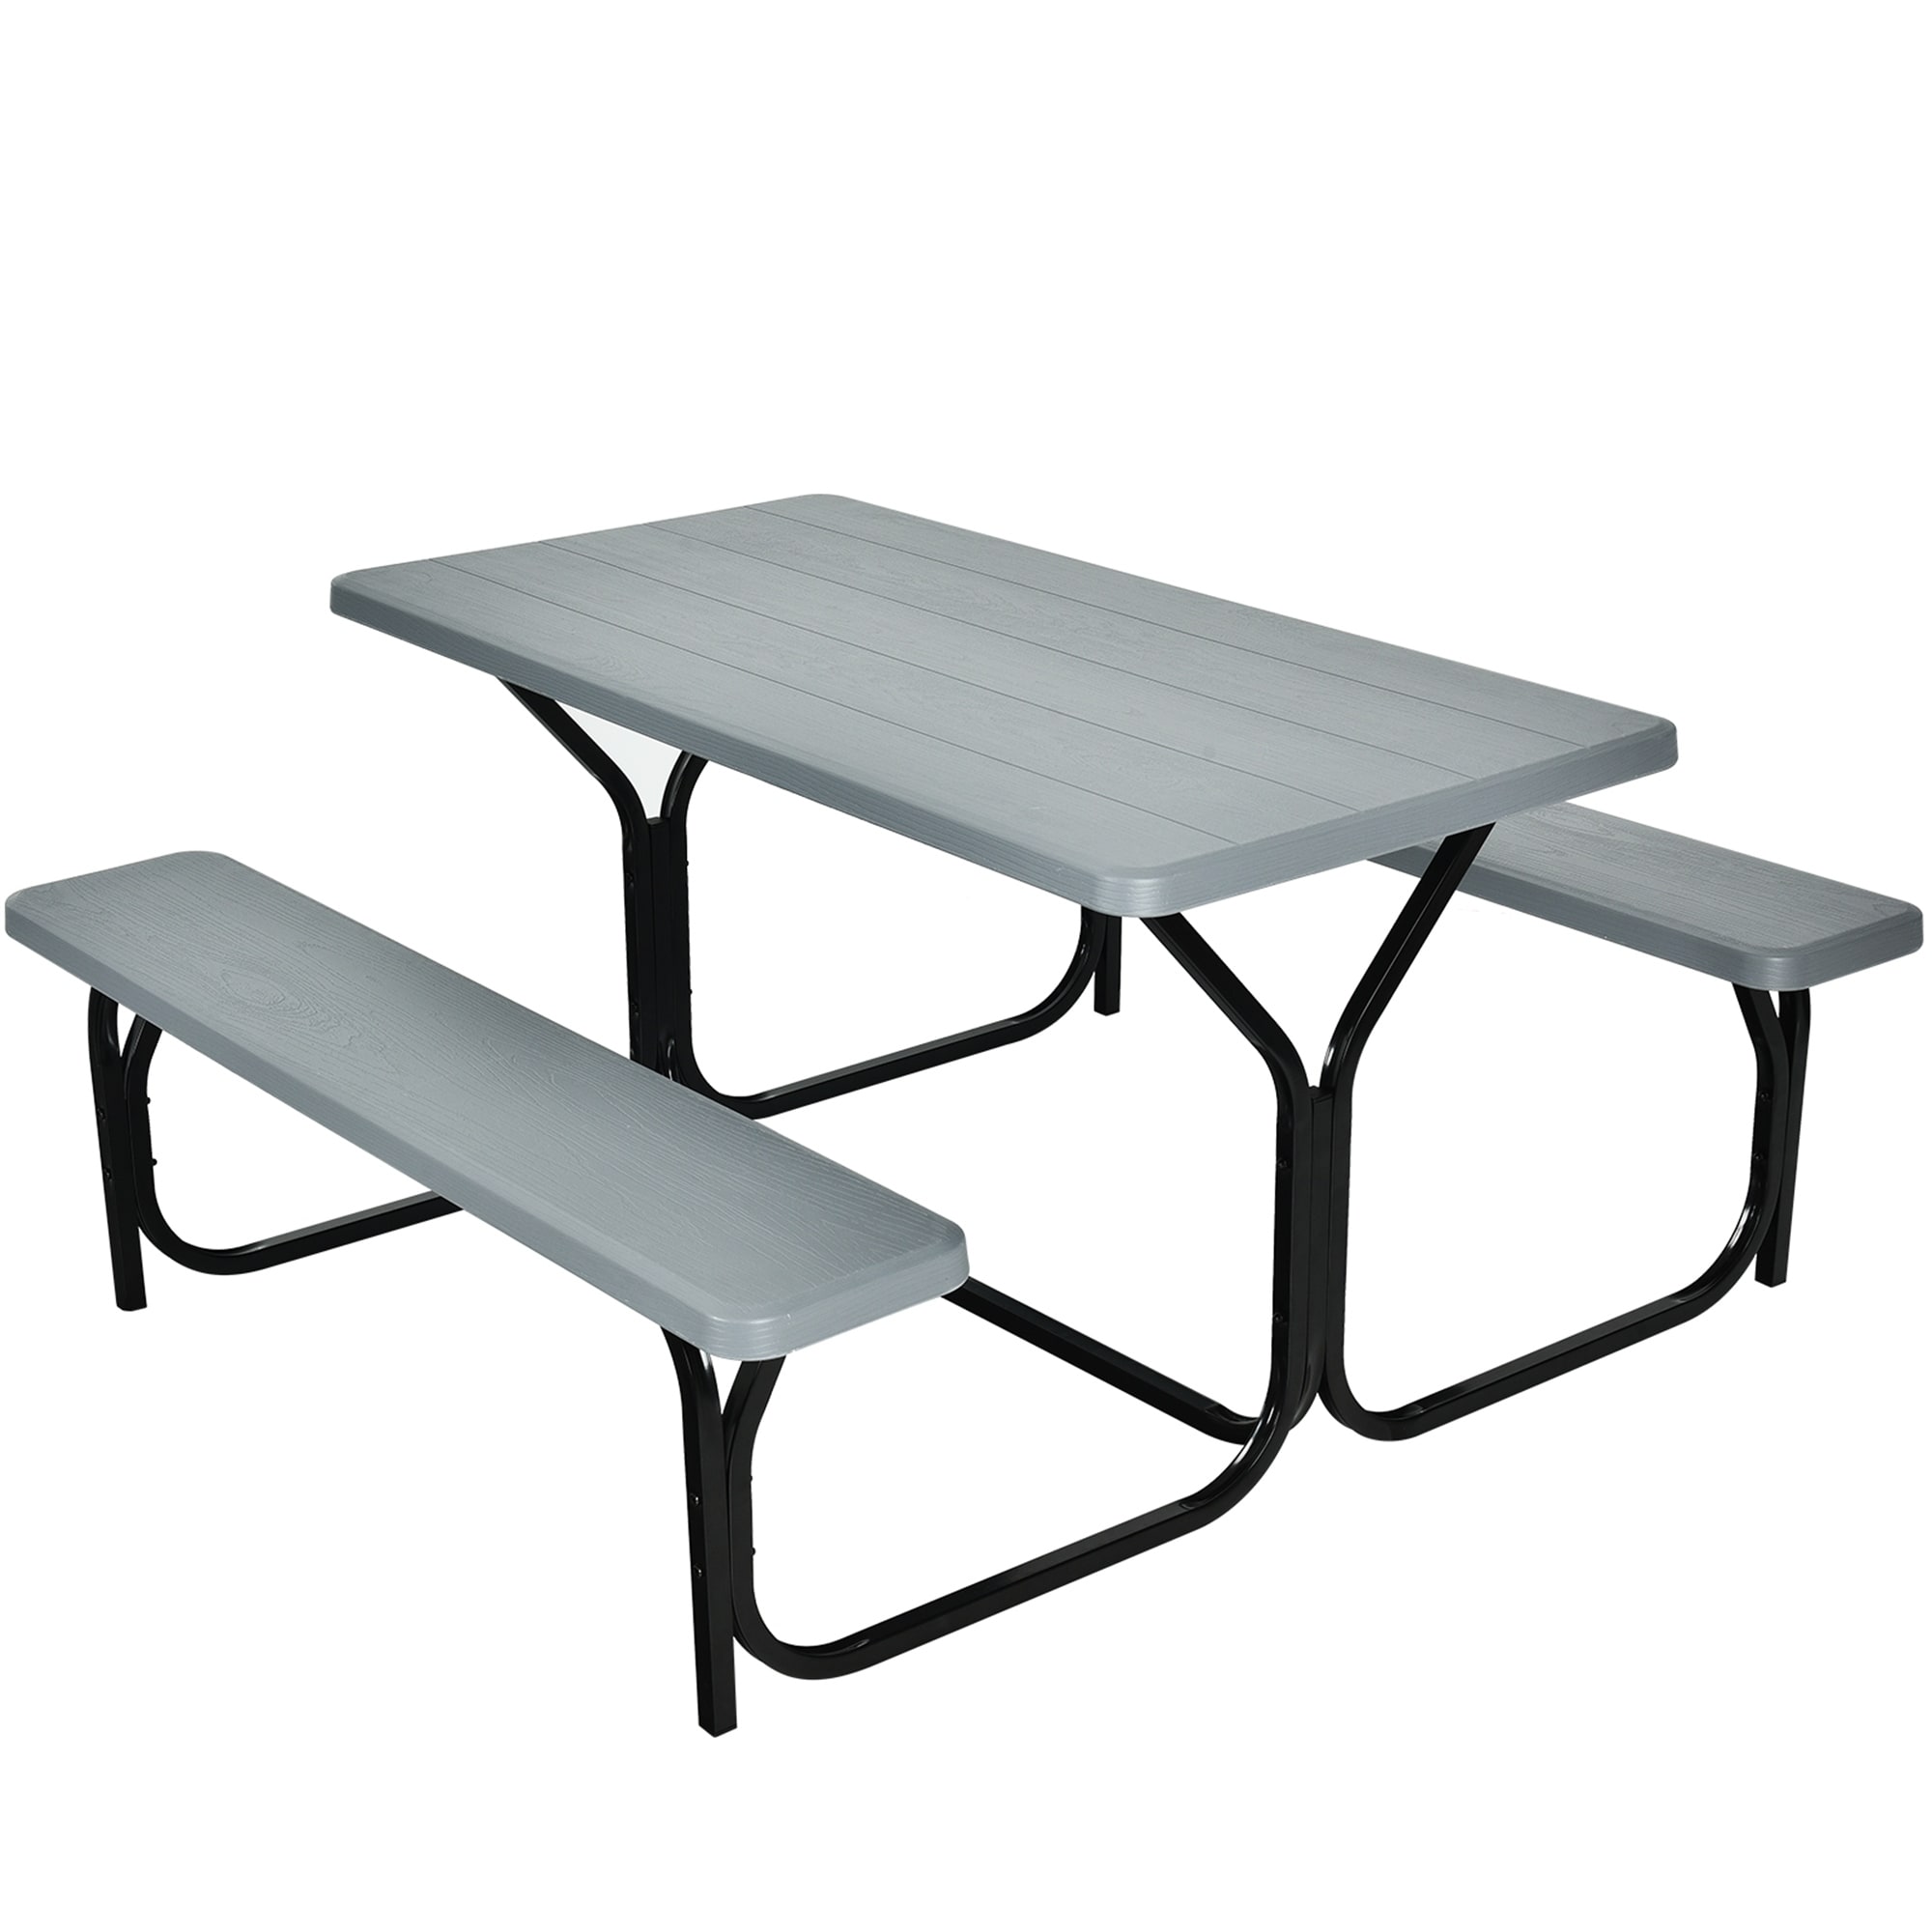 54 X 59 In Black Picnic Table Bench Set For Outdoor Camping